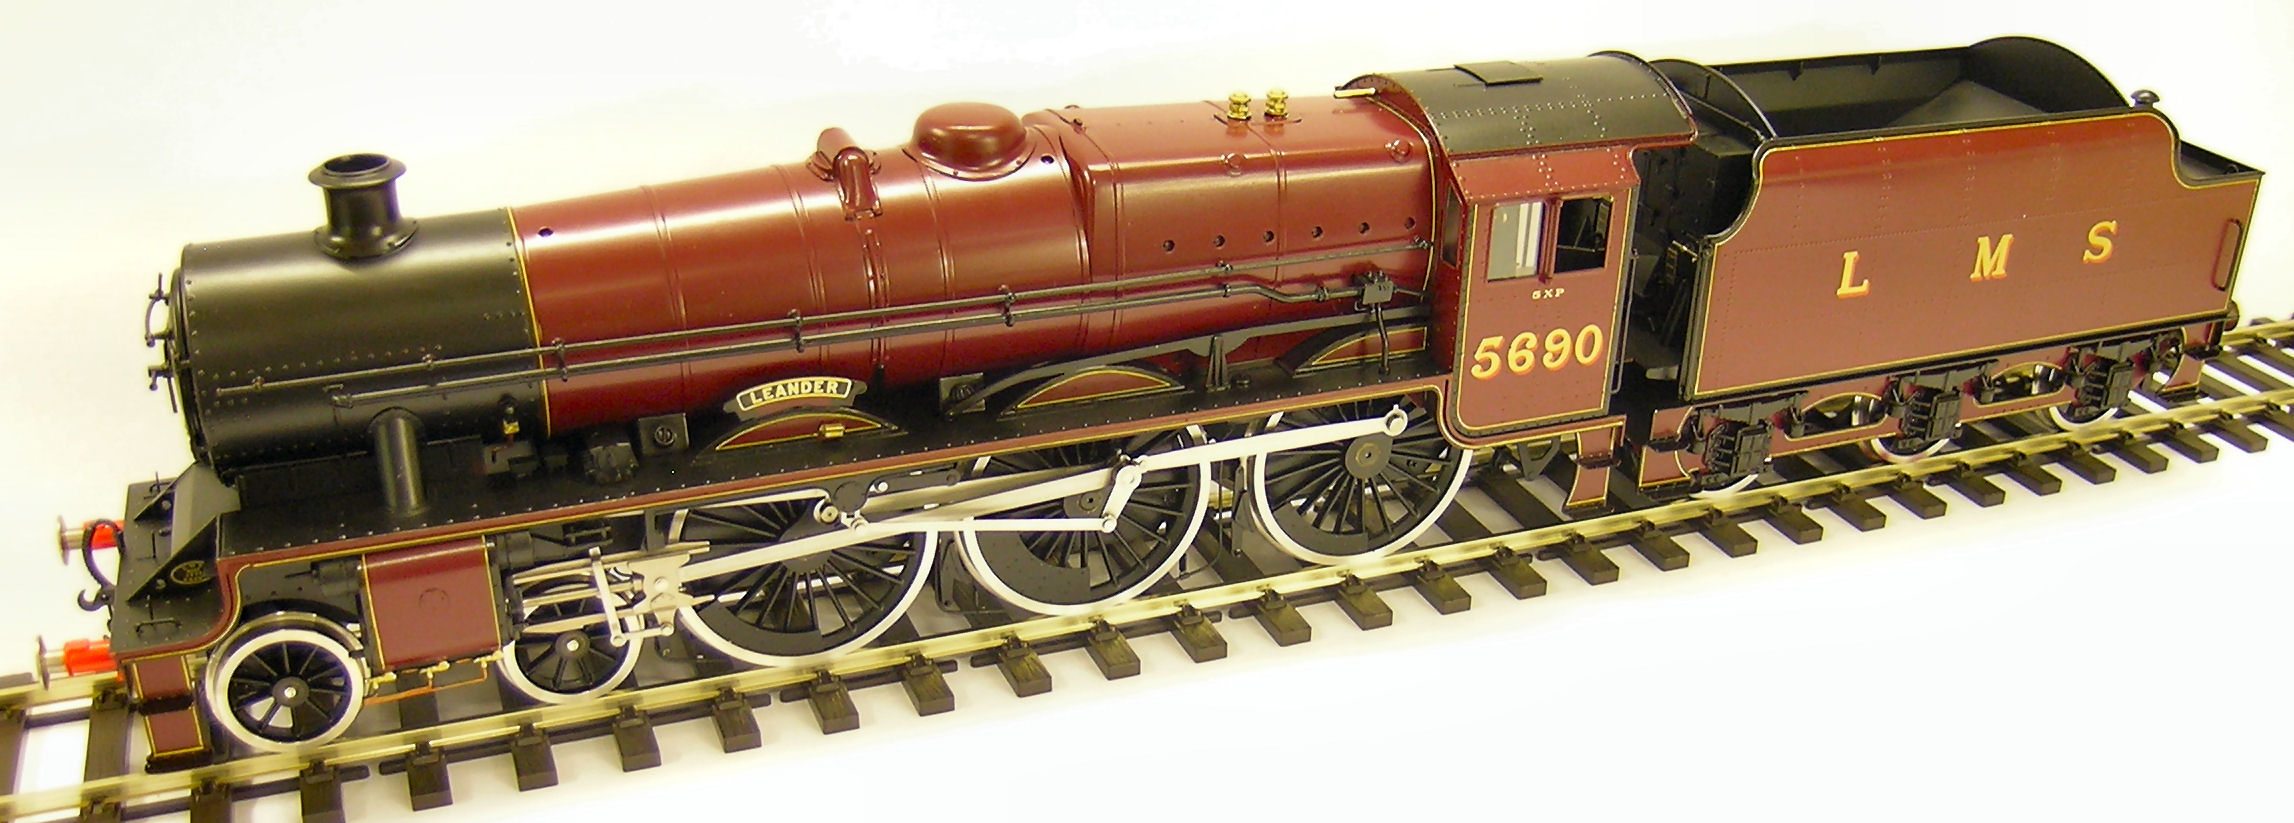 LMS Leanswer as preserved recently completed for a customer.